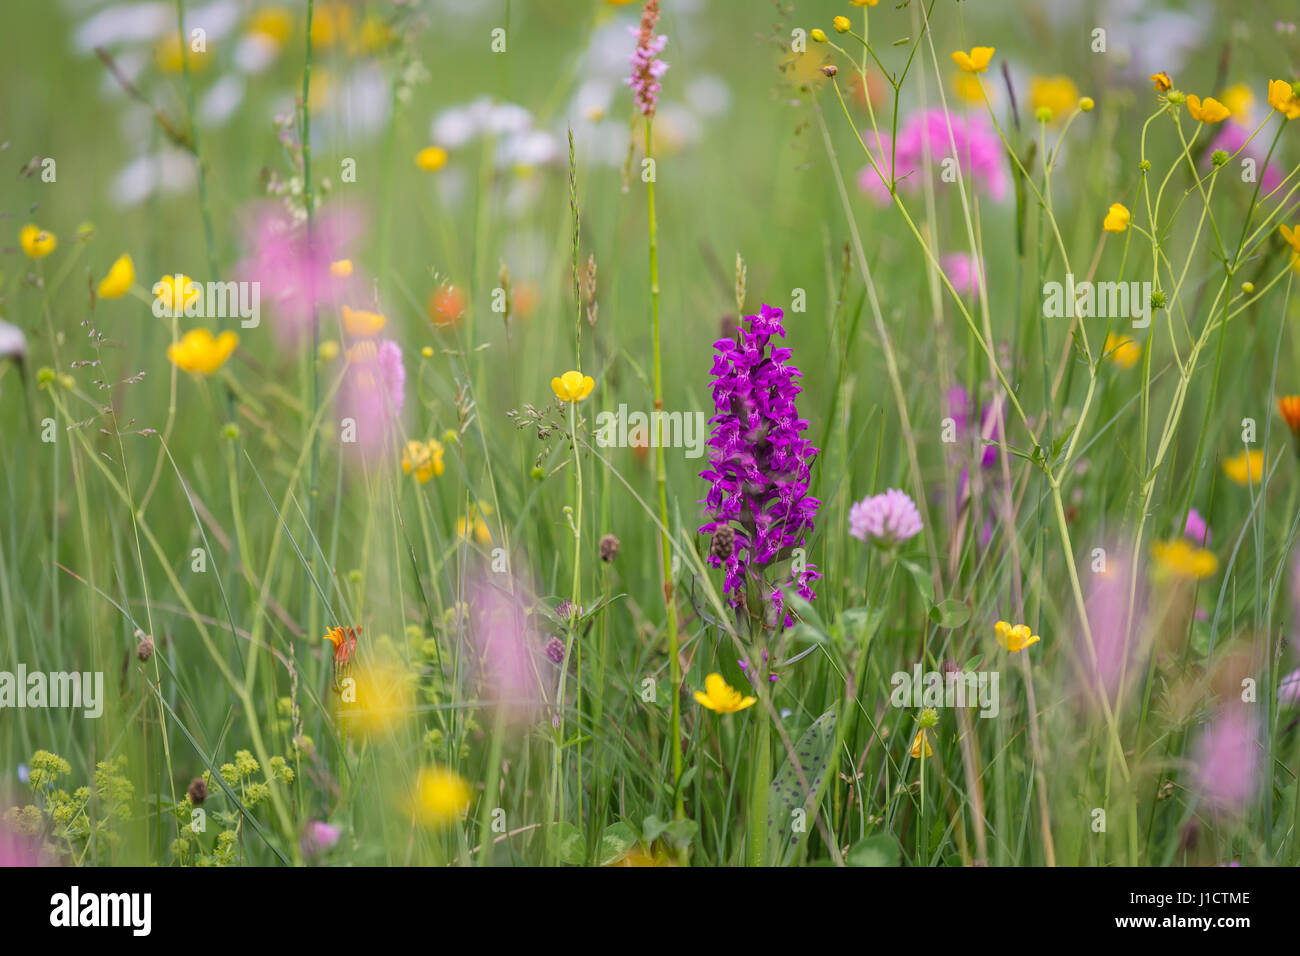 Wild flowering orchid in a meadow full of flowers Stock Photo